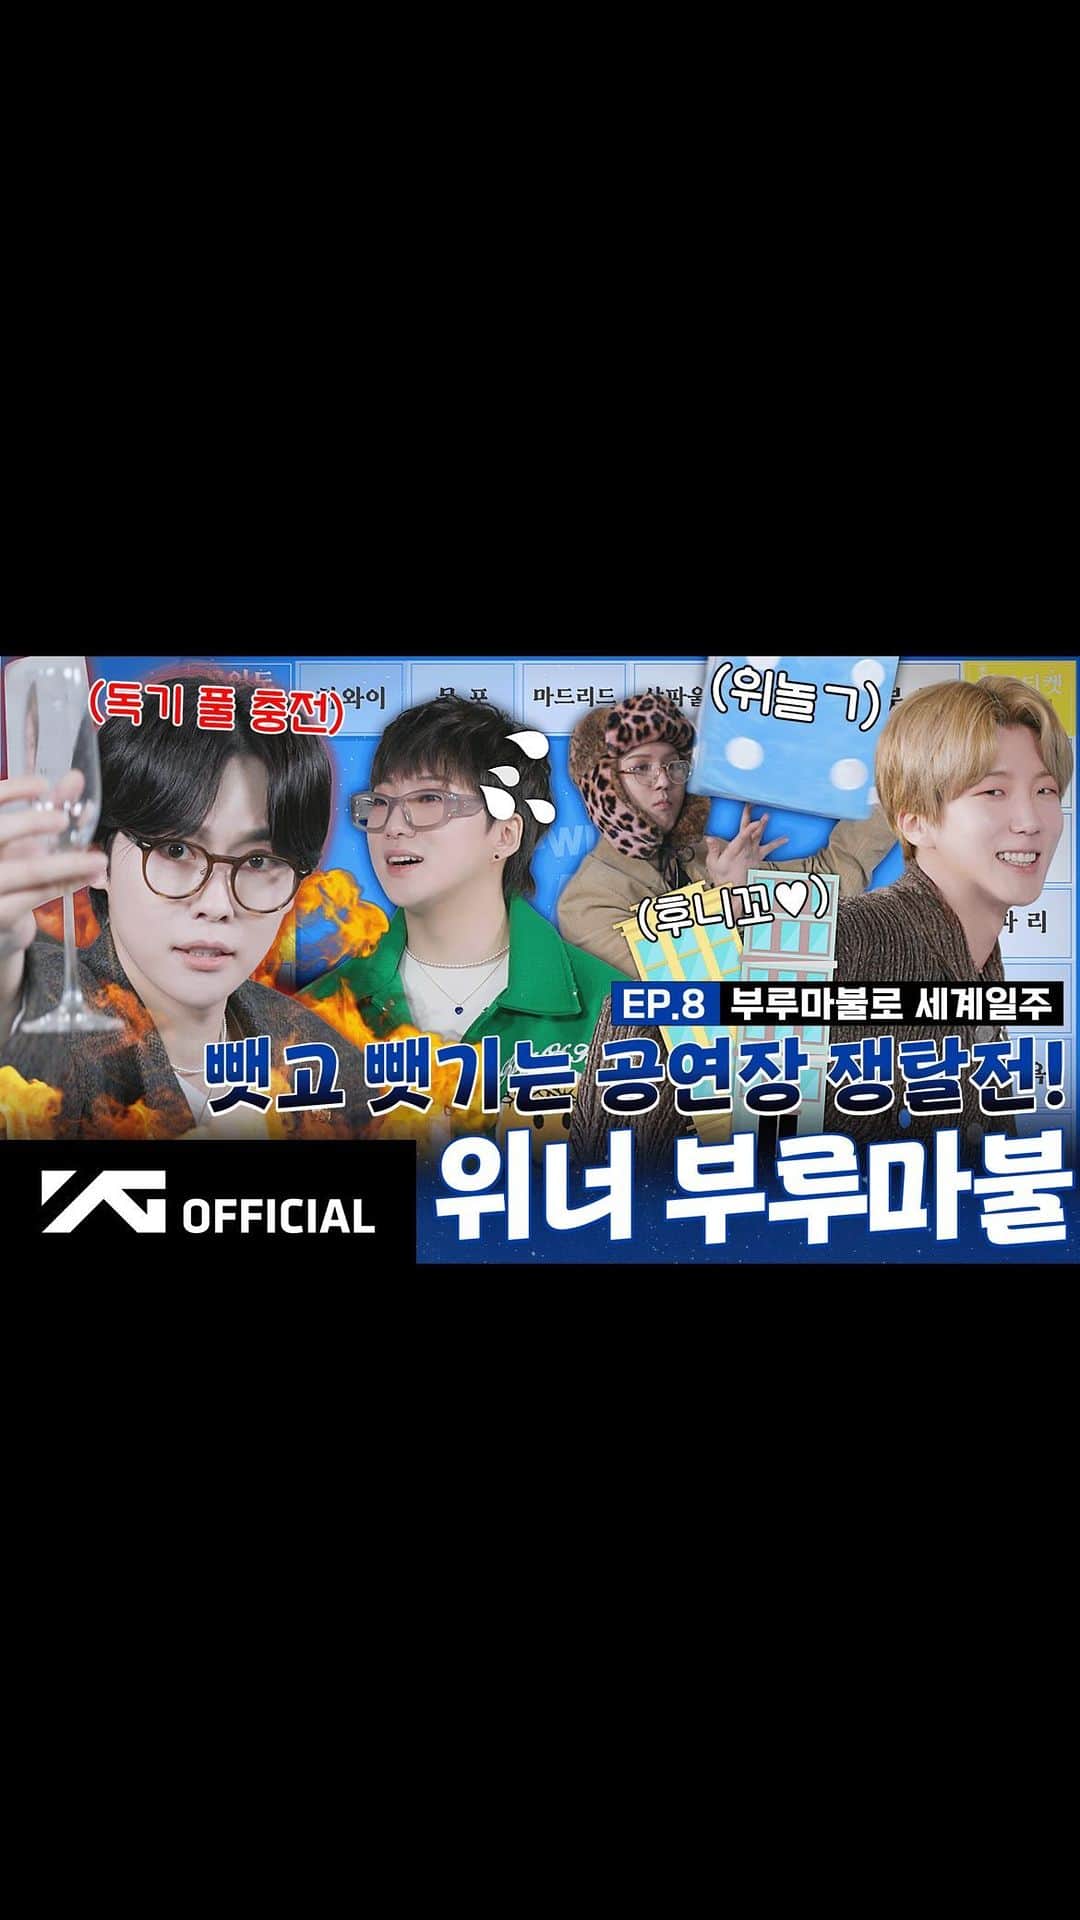 WINNERのインスタグラム：「[📺WINNER BROTHERS📺] EP.8 부루마불로 세계일주🎲 | World Tour with Blue Marble game  ▶️https://youtu.be/T8aIJWzCDKY  #WINNER #위너 #WINNER_BROTHERS #위너브라더스 #EP8 #부루마불 #WorldTour #YG」